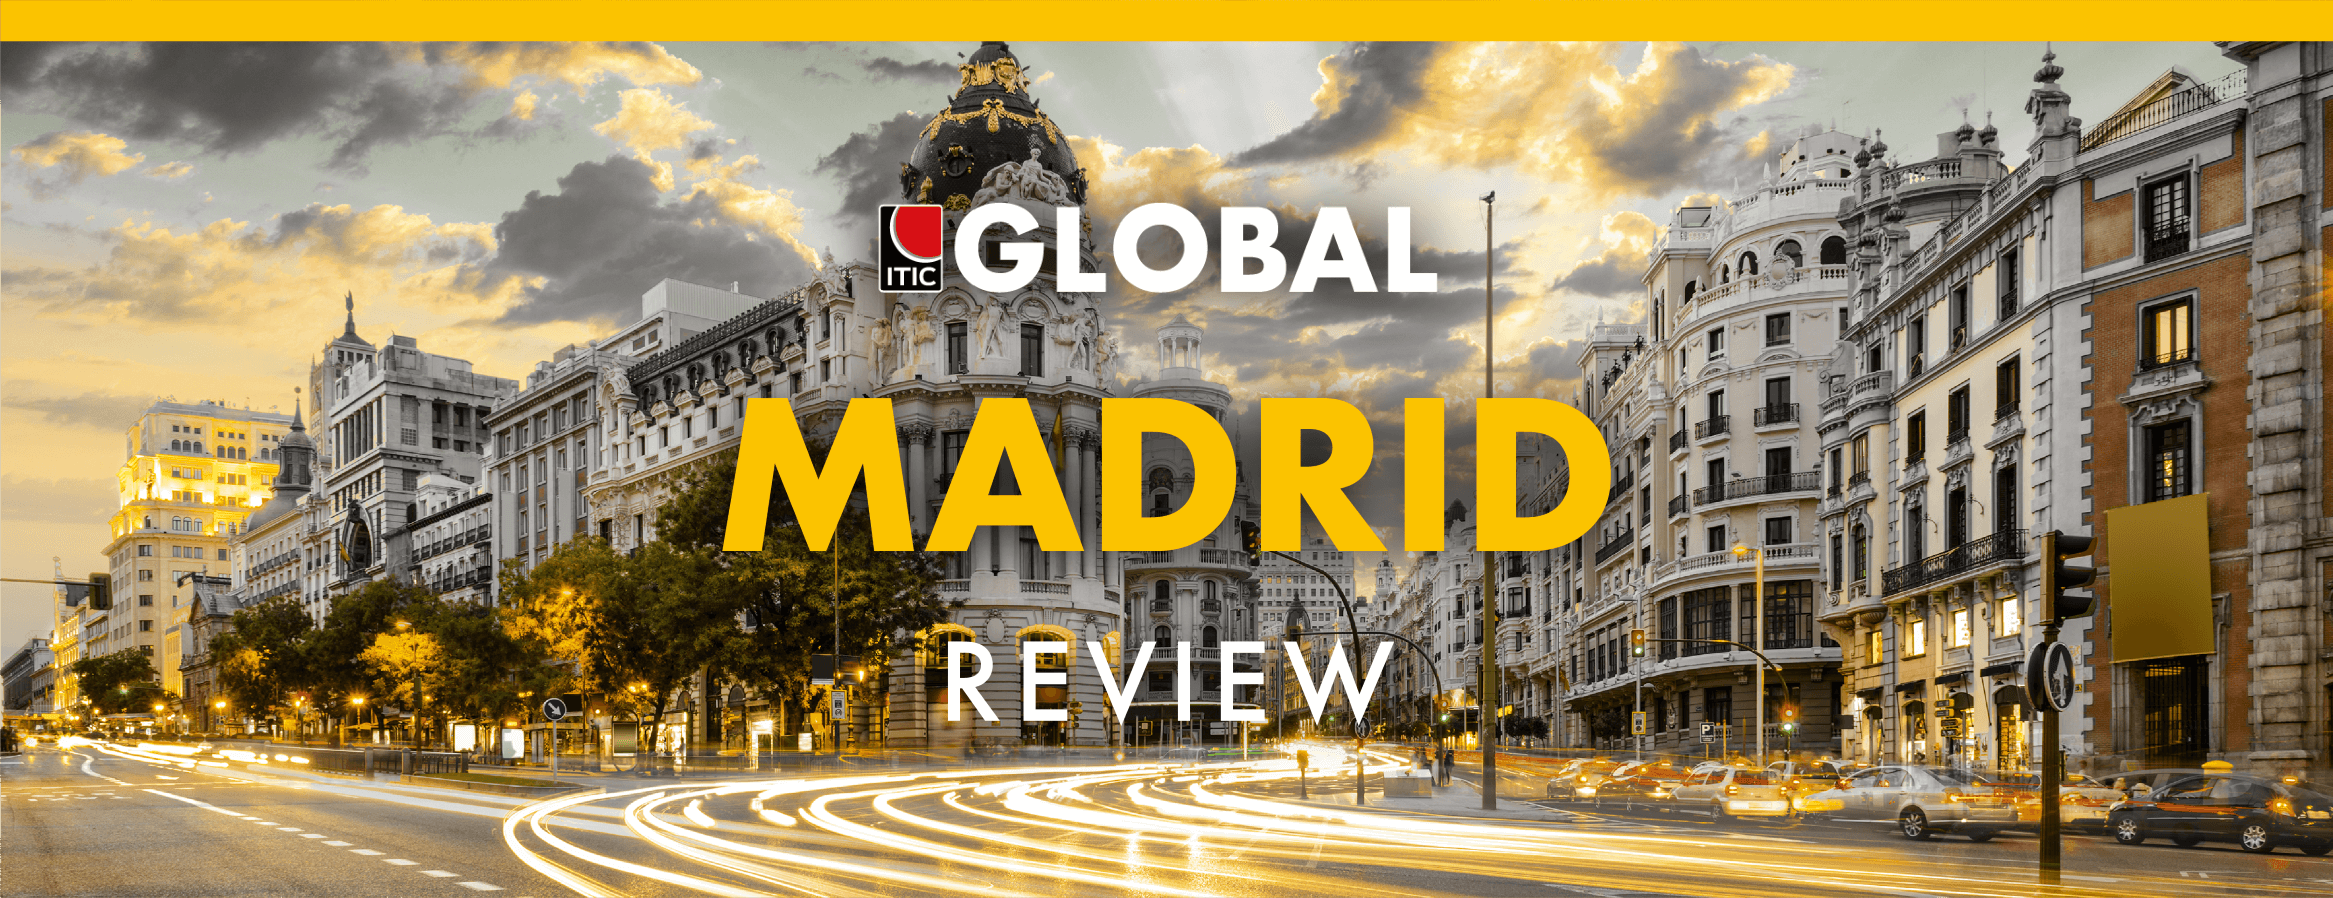 ITIC Global Review